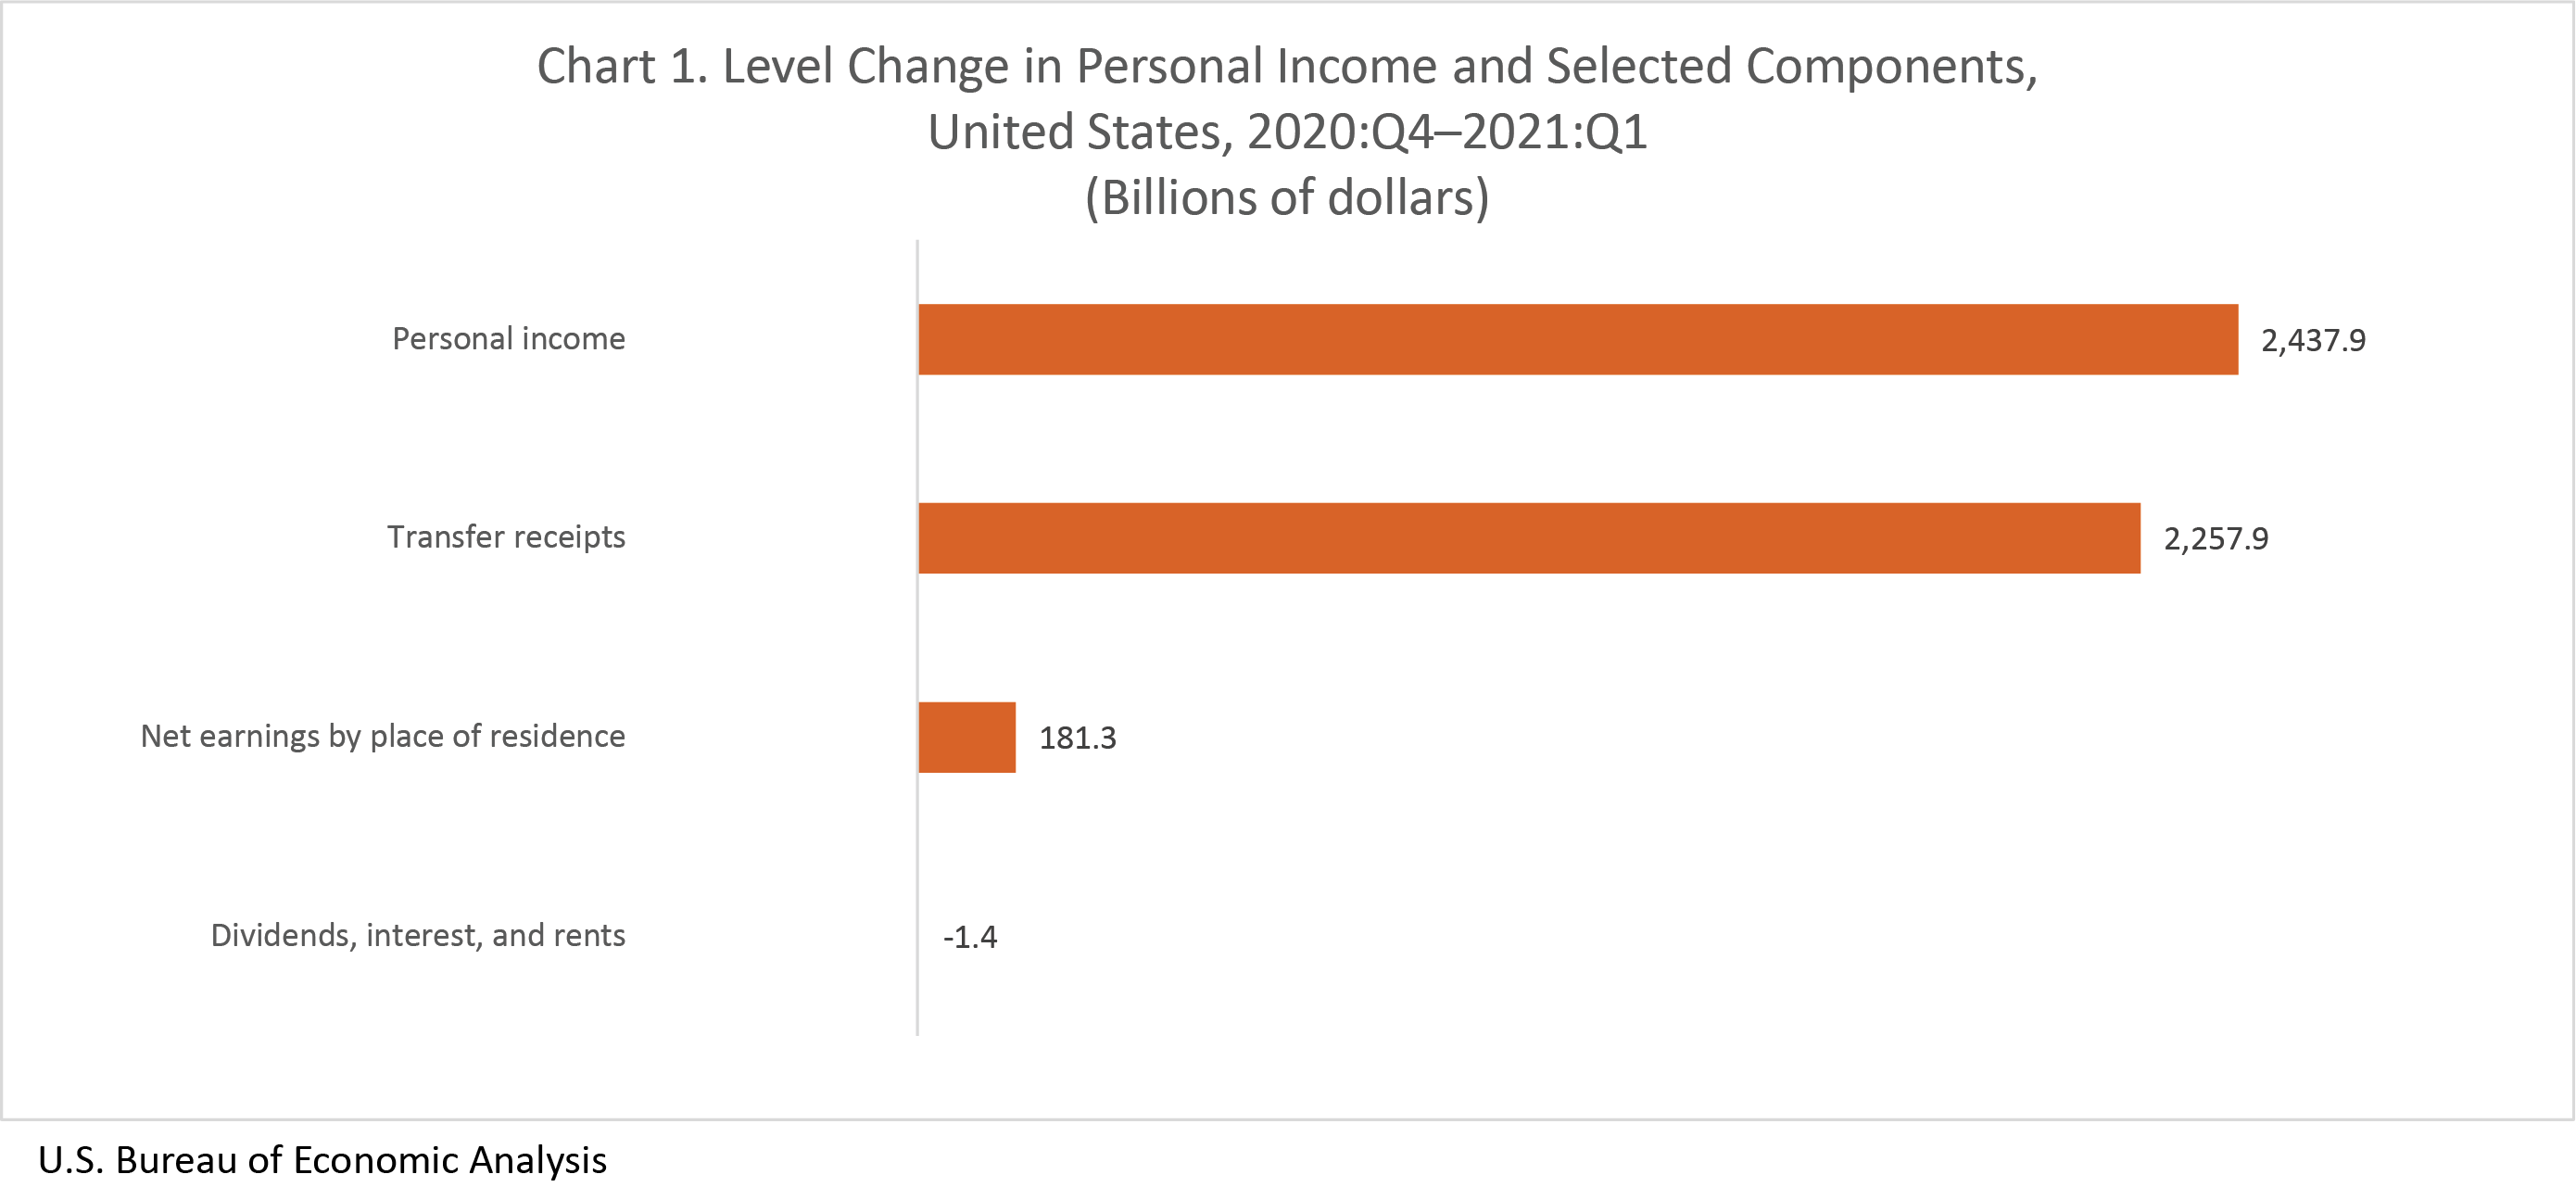 Chart 1. Level Change in Personal Income and Selected Components, U.S., 2020:Q4-2021:Q1